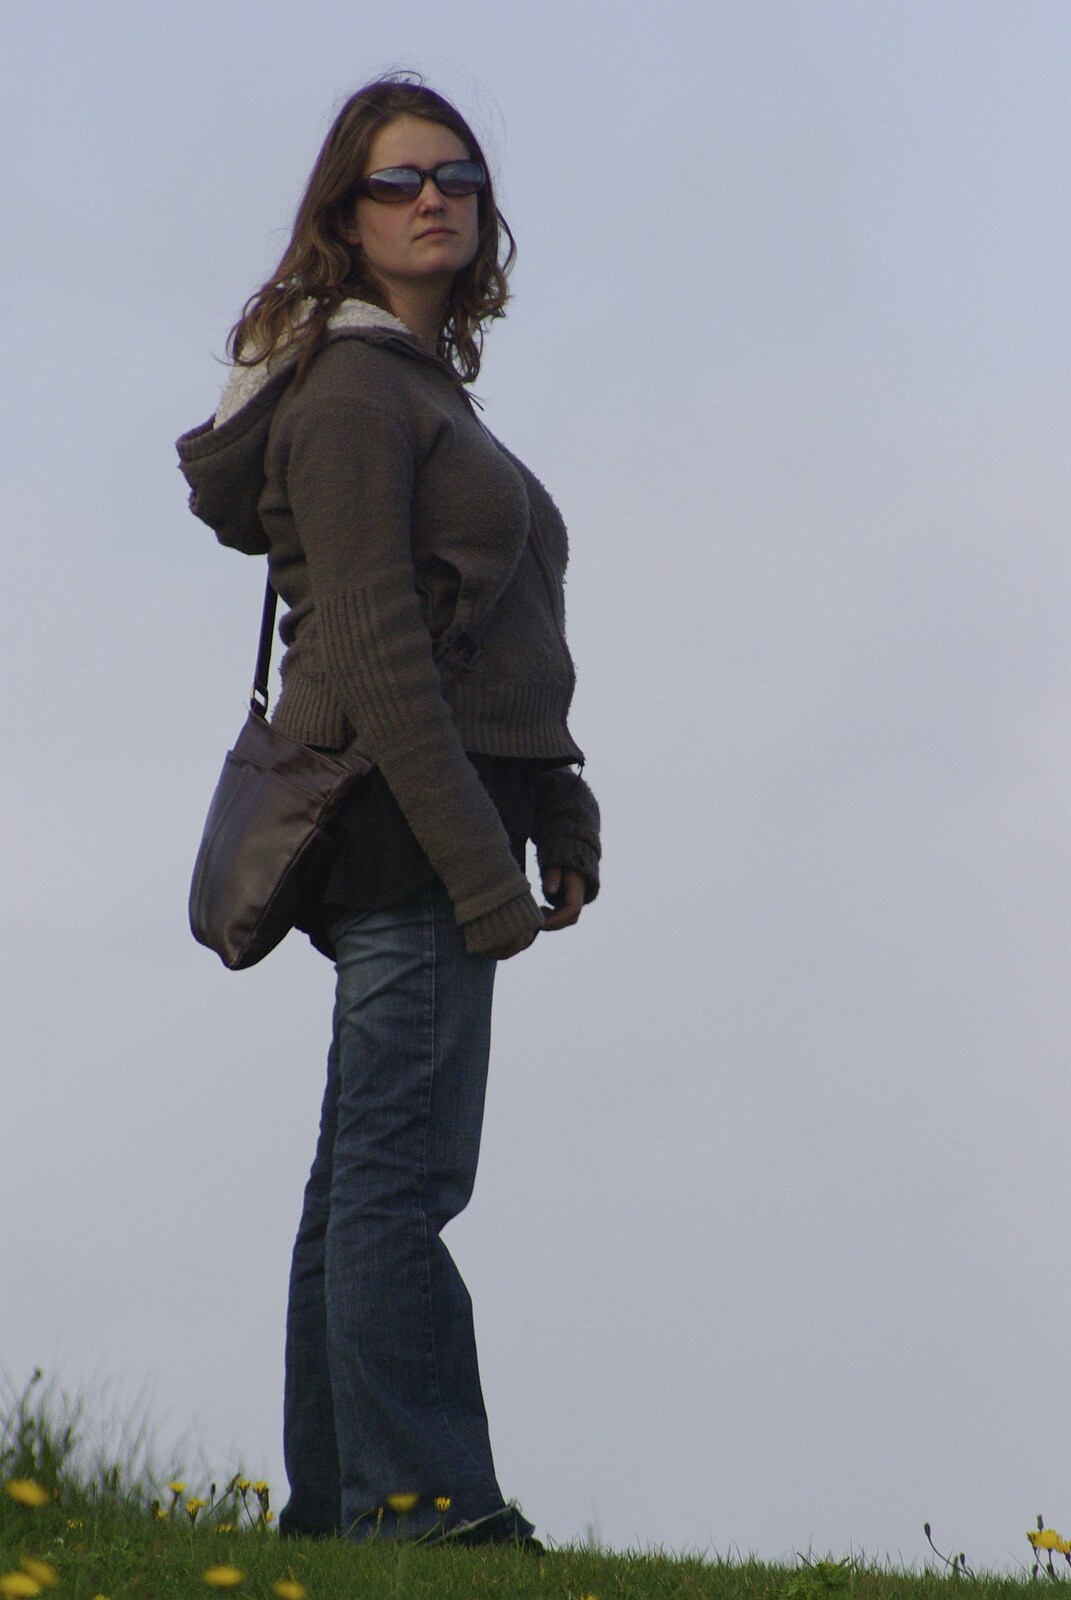 30th Birthday Party in Kilkee, County Clare, Ireland - 22nd September 2007: Isobel on a cliff-top